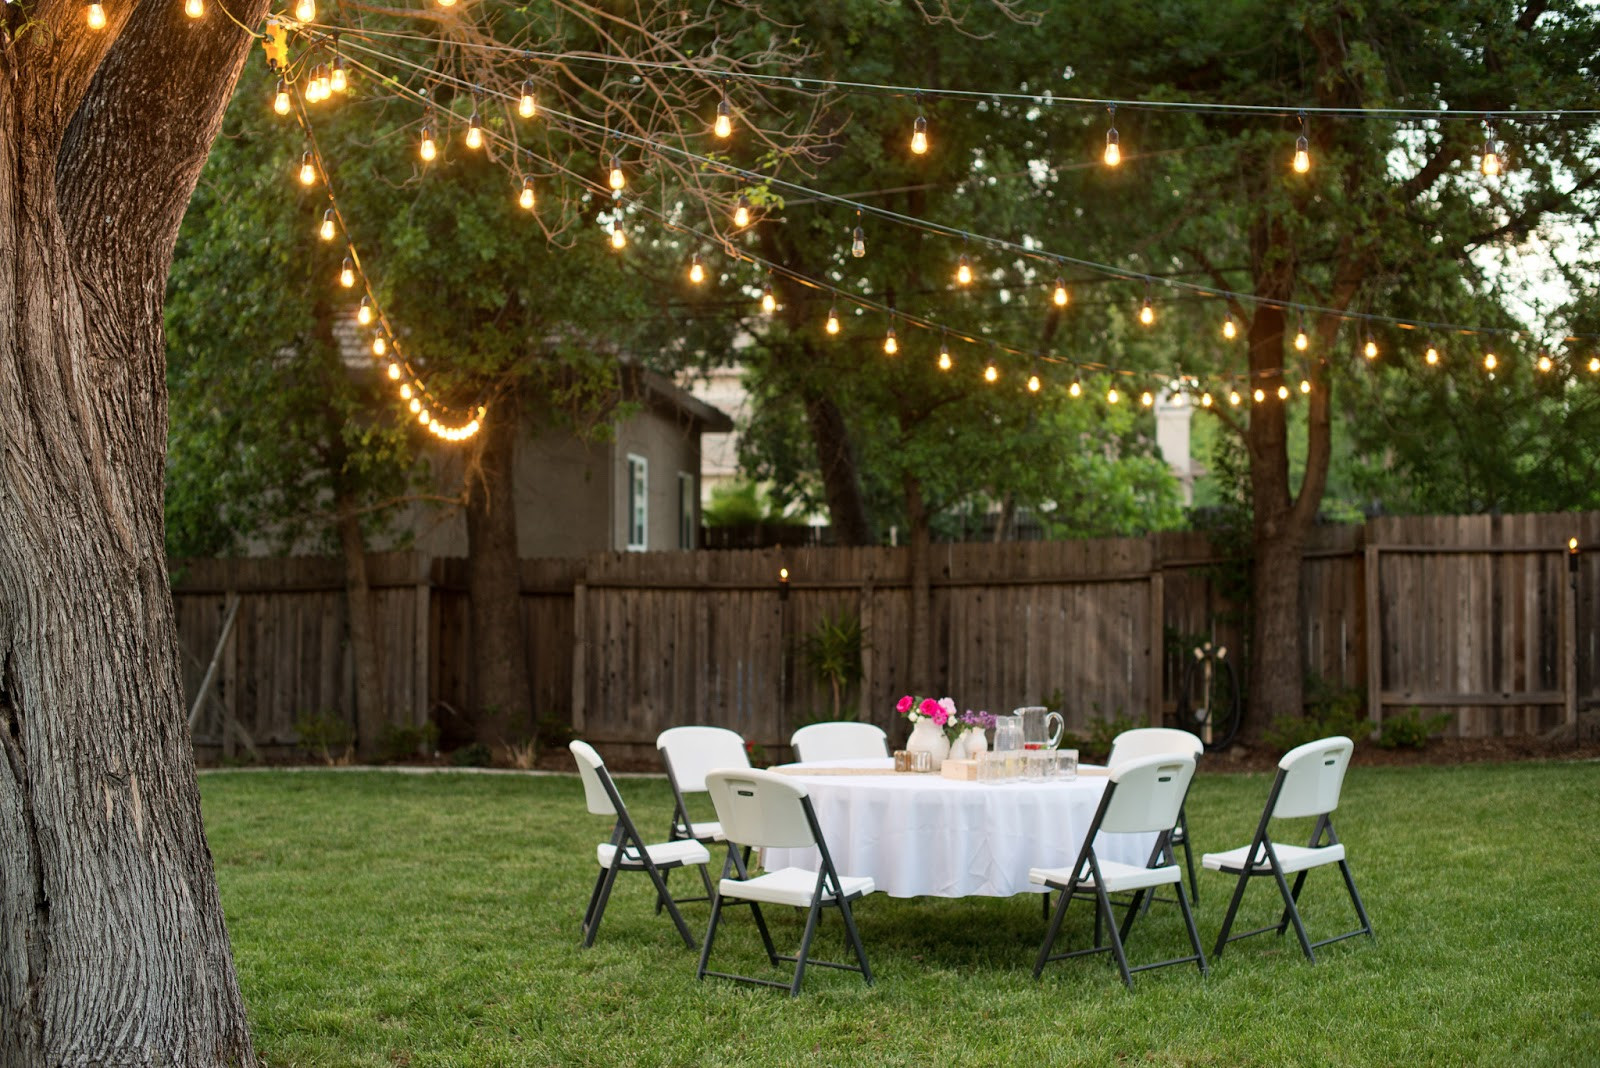 Backyard Party Ideas For Adults
 Backyard Party Ideas For Adults Image — Design & Ideas